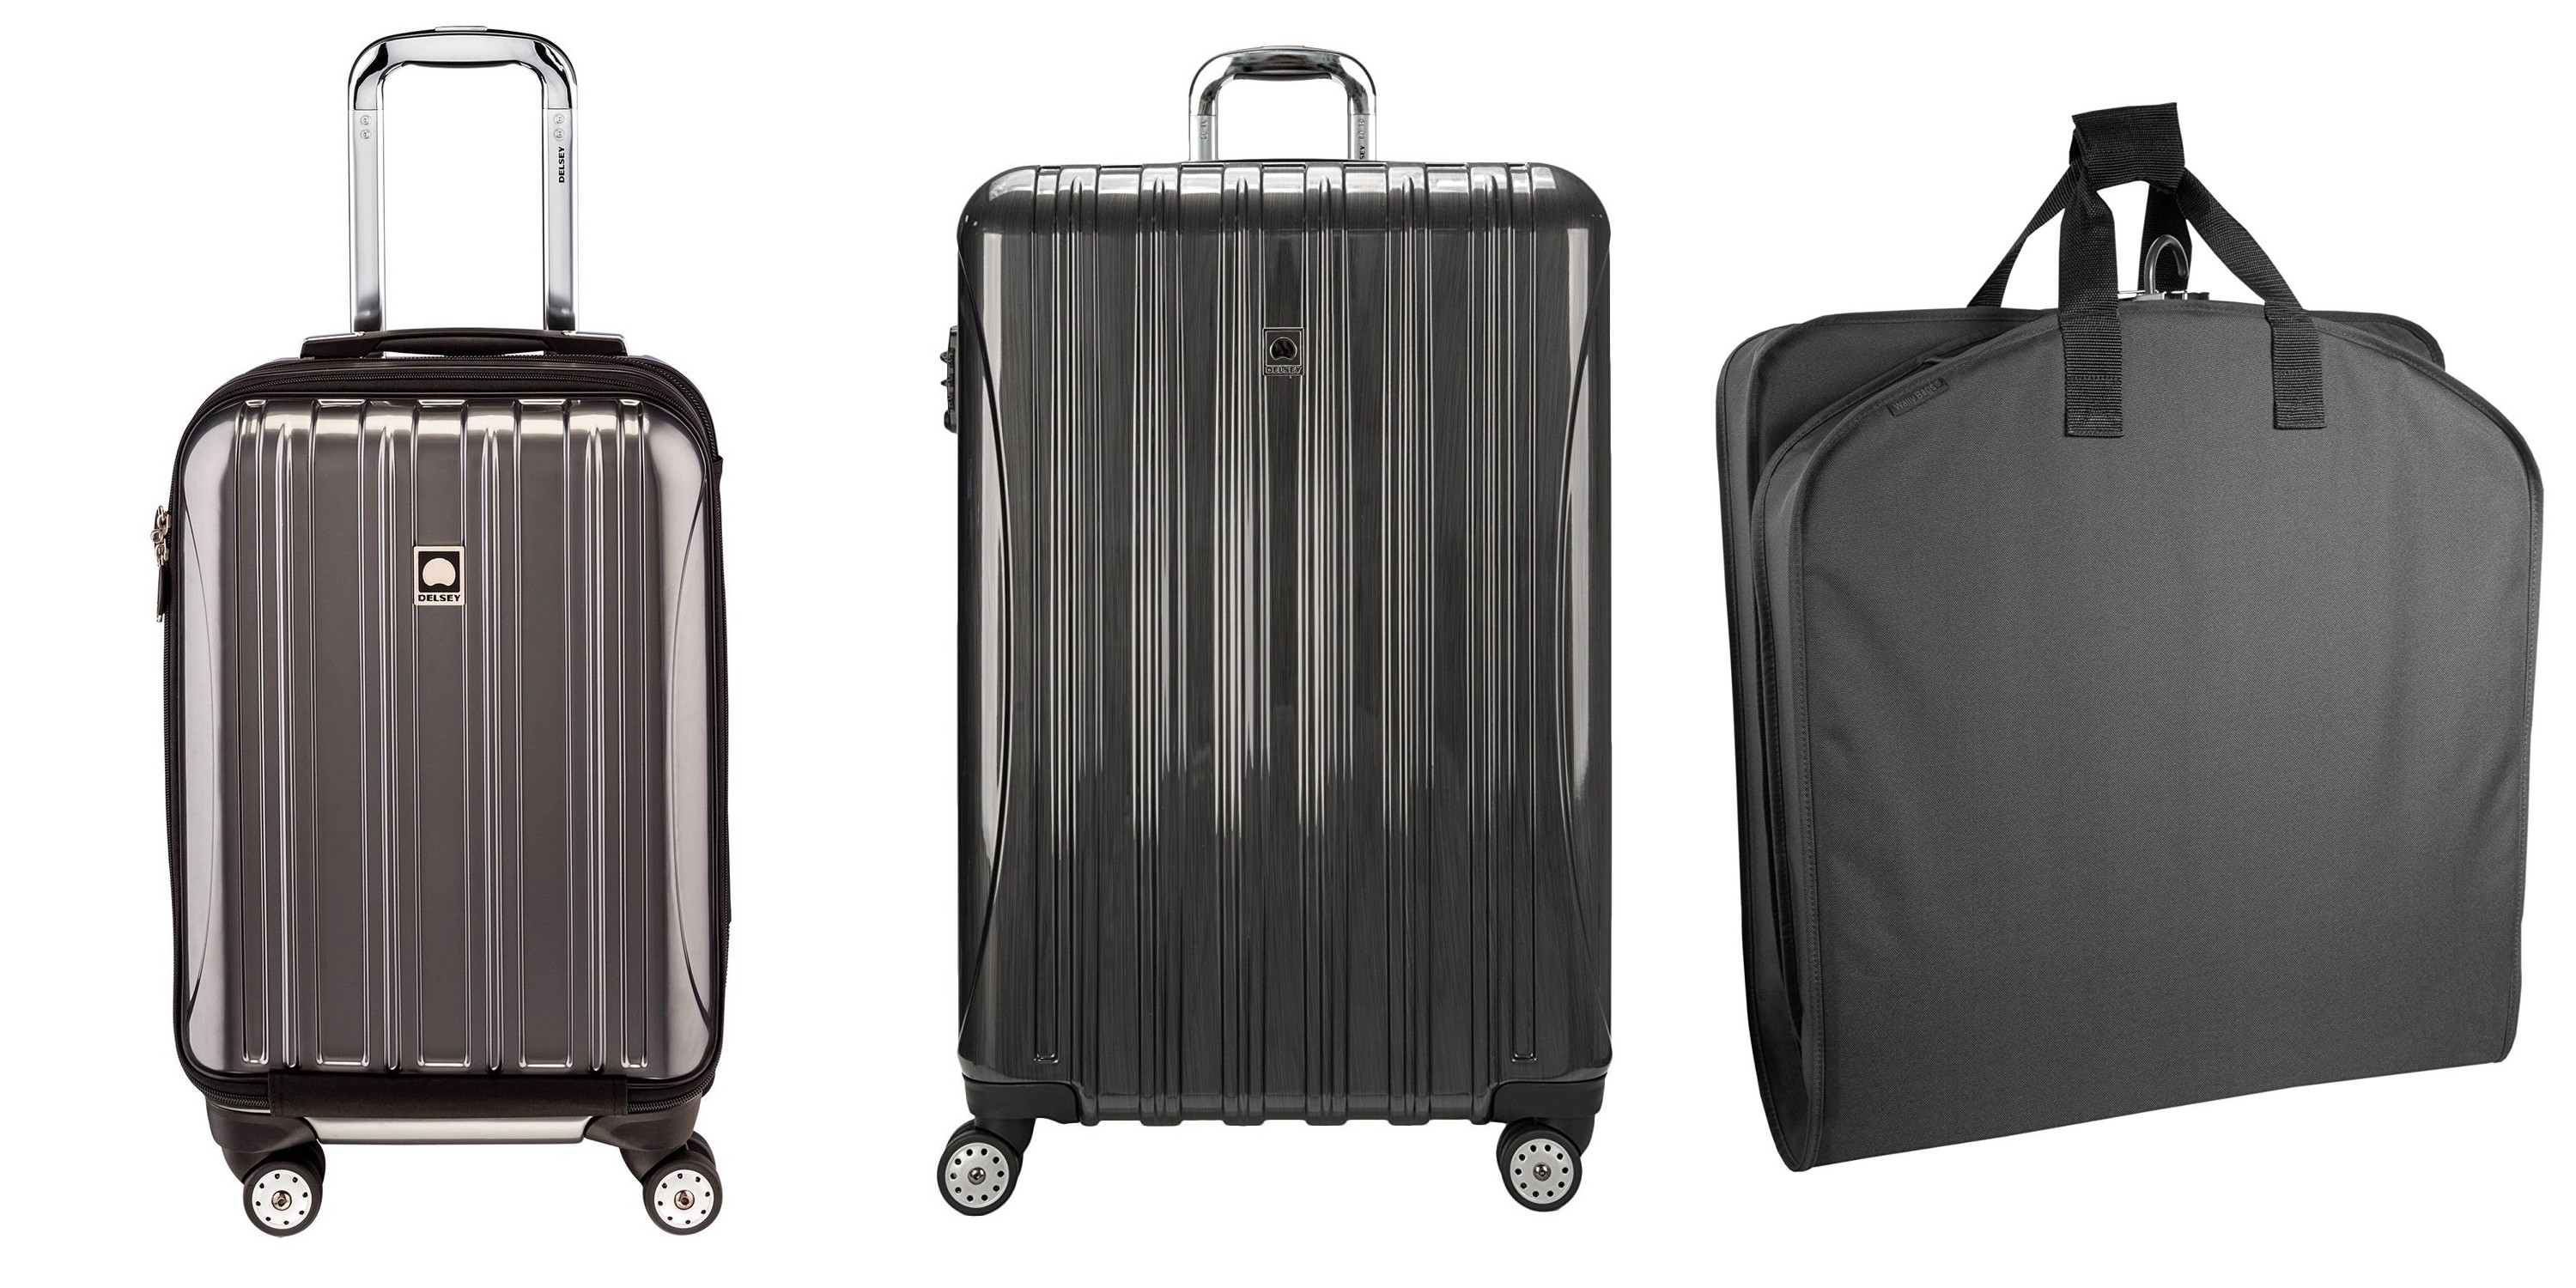 Luggage from $30 for today only at Amazon: carry-ons, garment bags, more